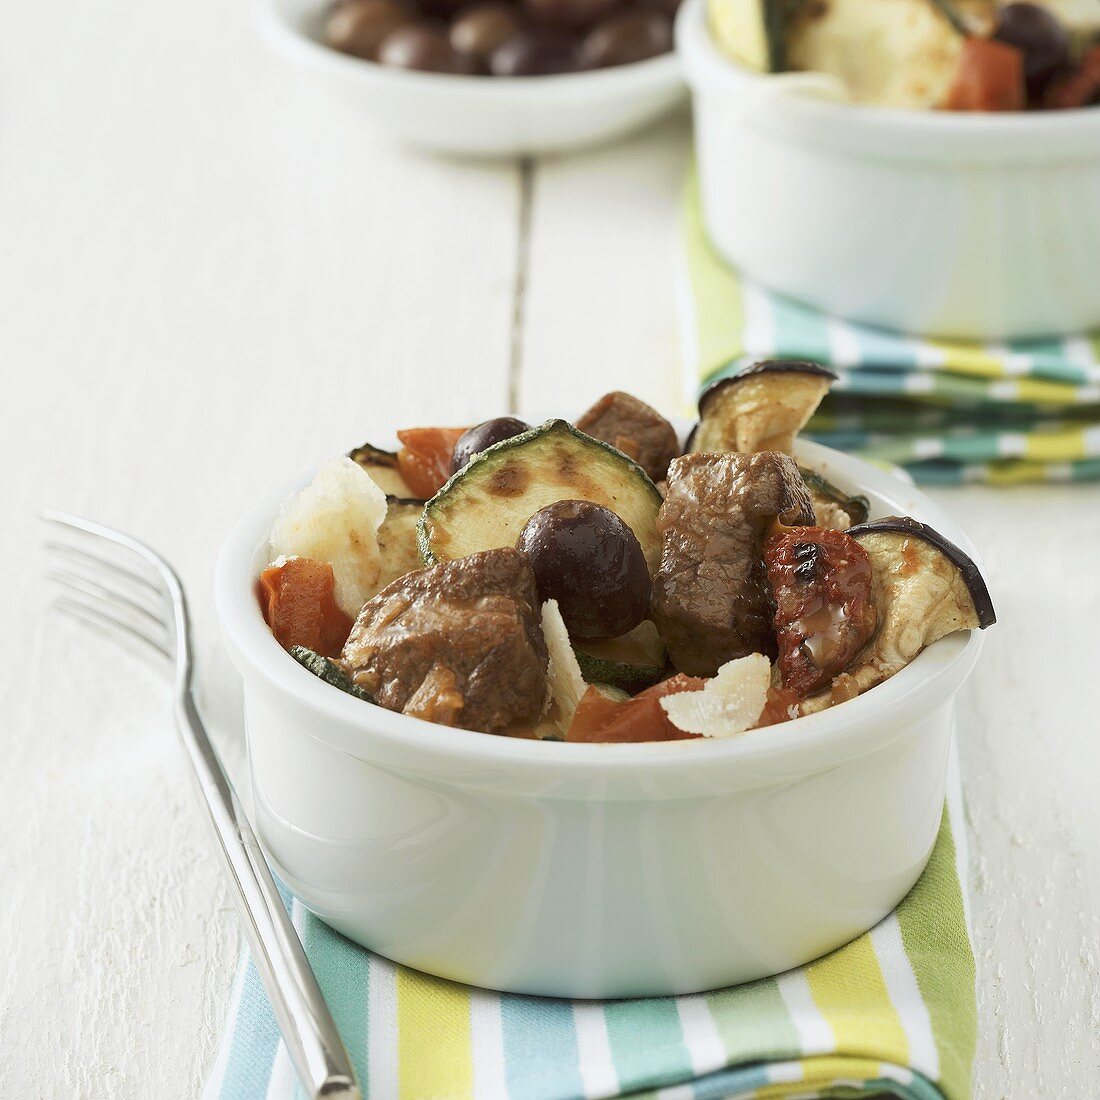 Pork with roasted vegetables in a bowl